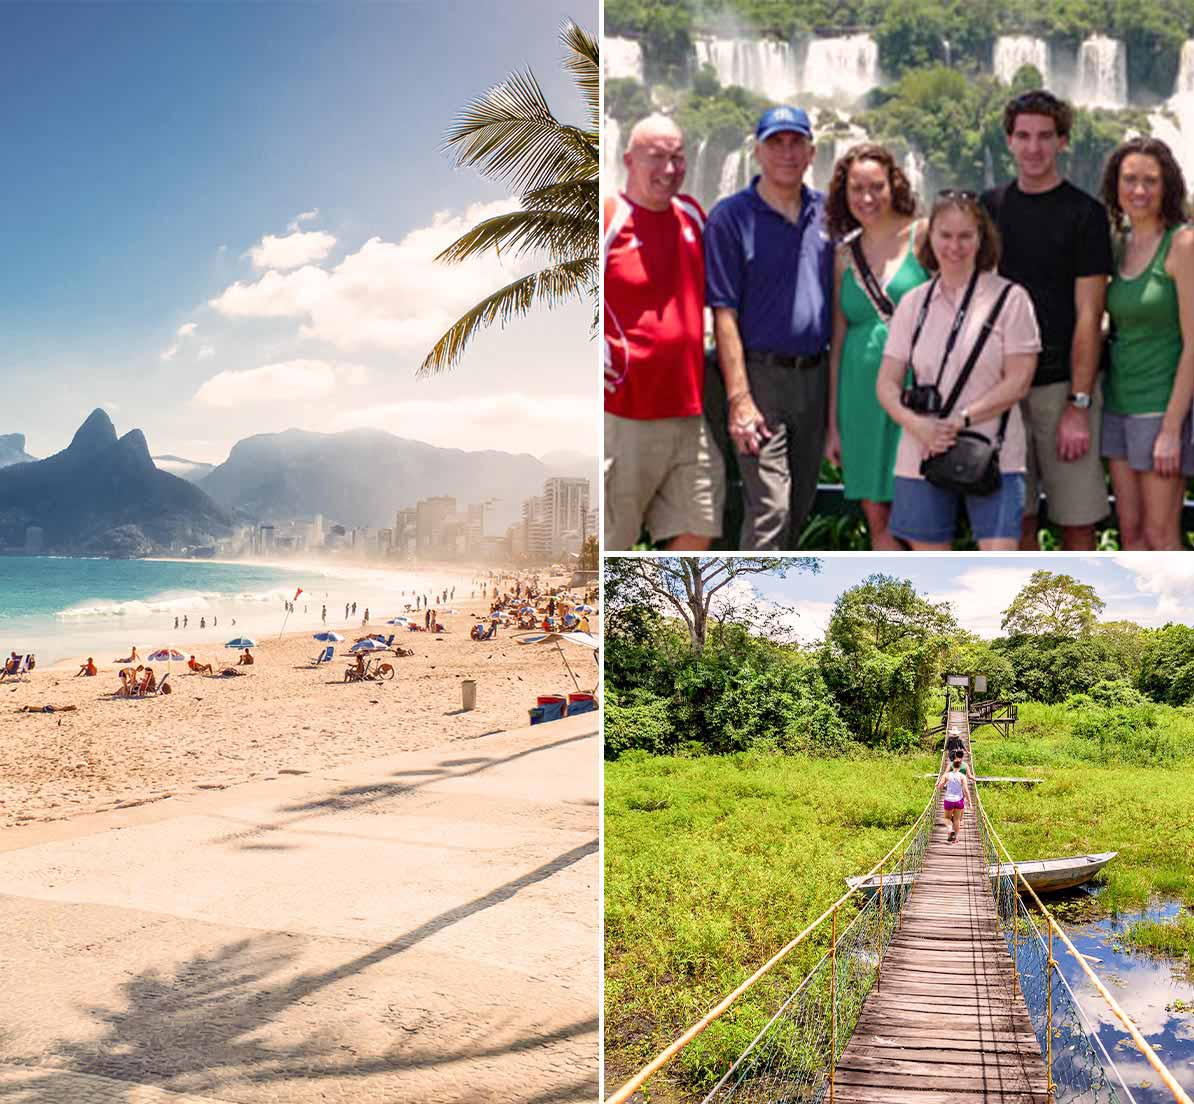 A collage showing a beach in Rio, a family at Iguazu Falls, and people crossing a wooden bridge.